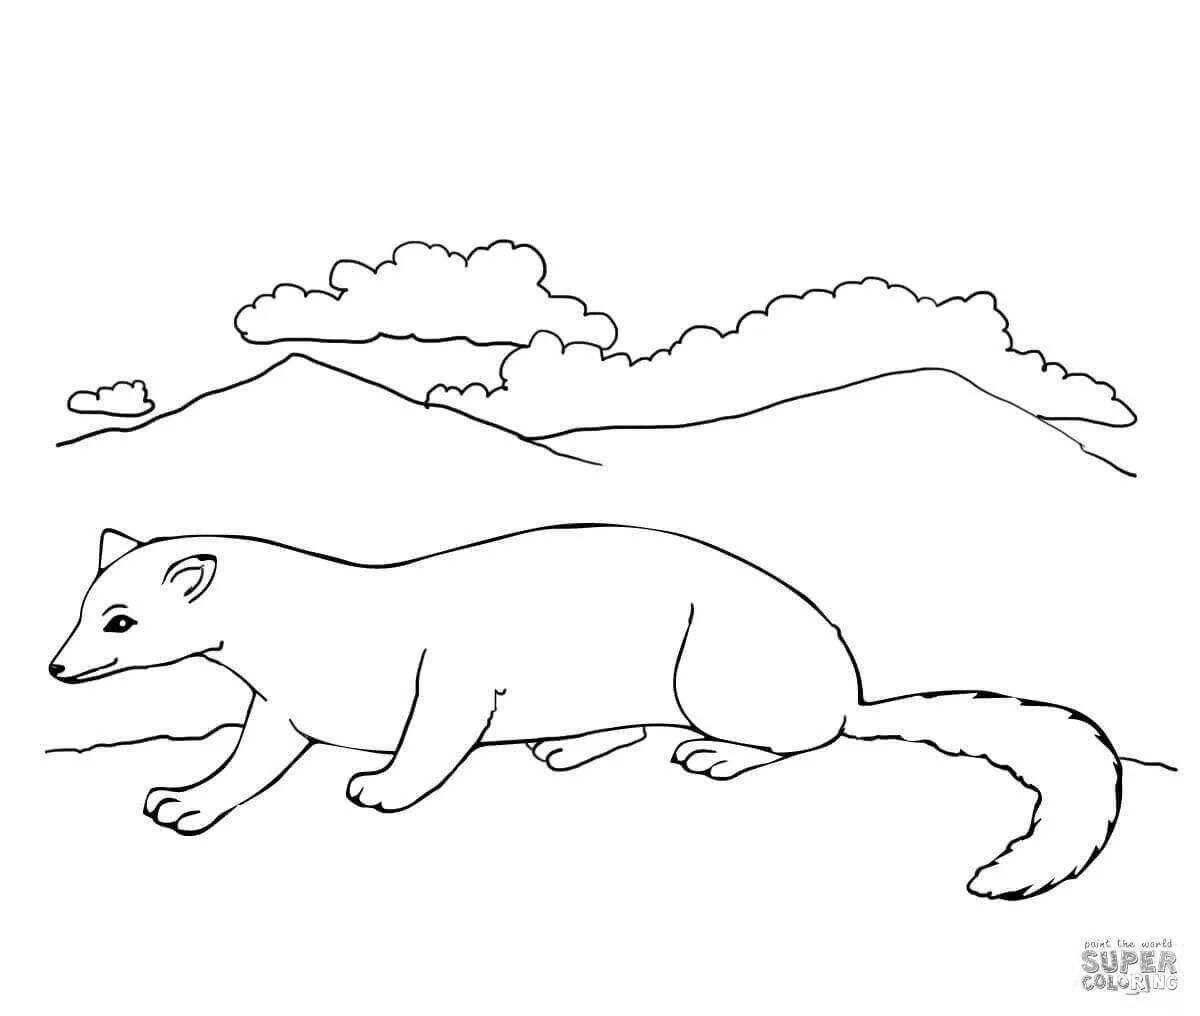 Incredible weasel coloring book for kids